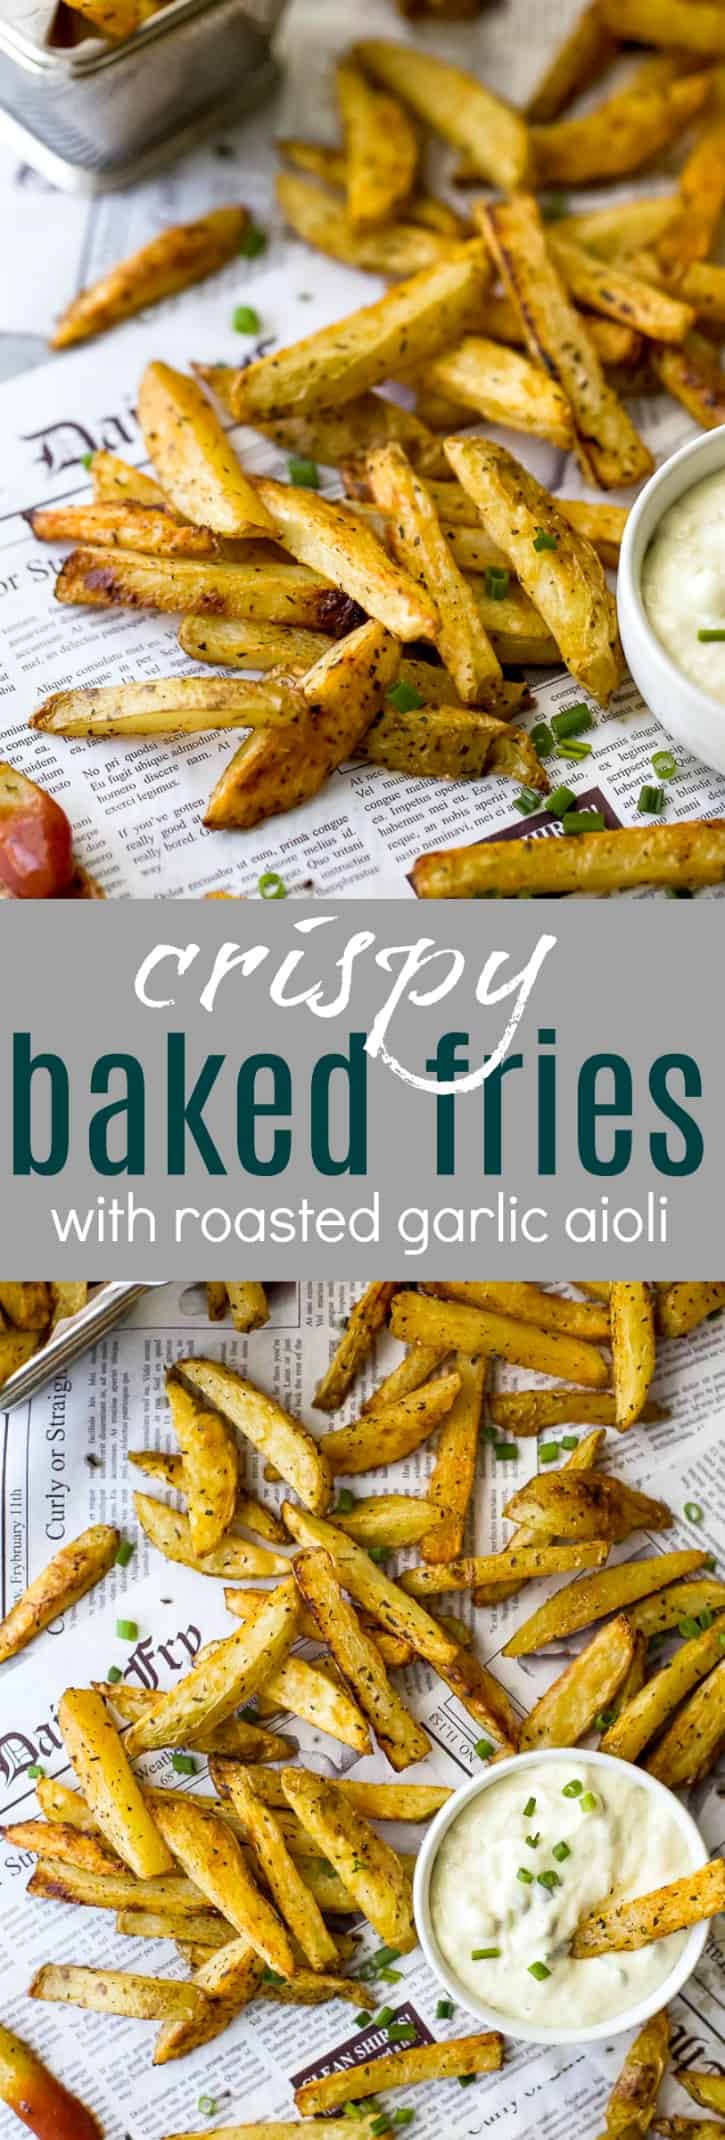 Crispy Baked Fries with Roasted Garlic Aioli on sheets of newspaper